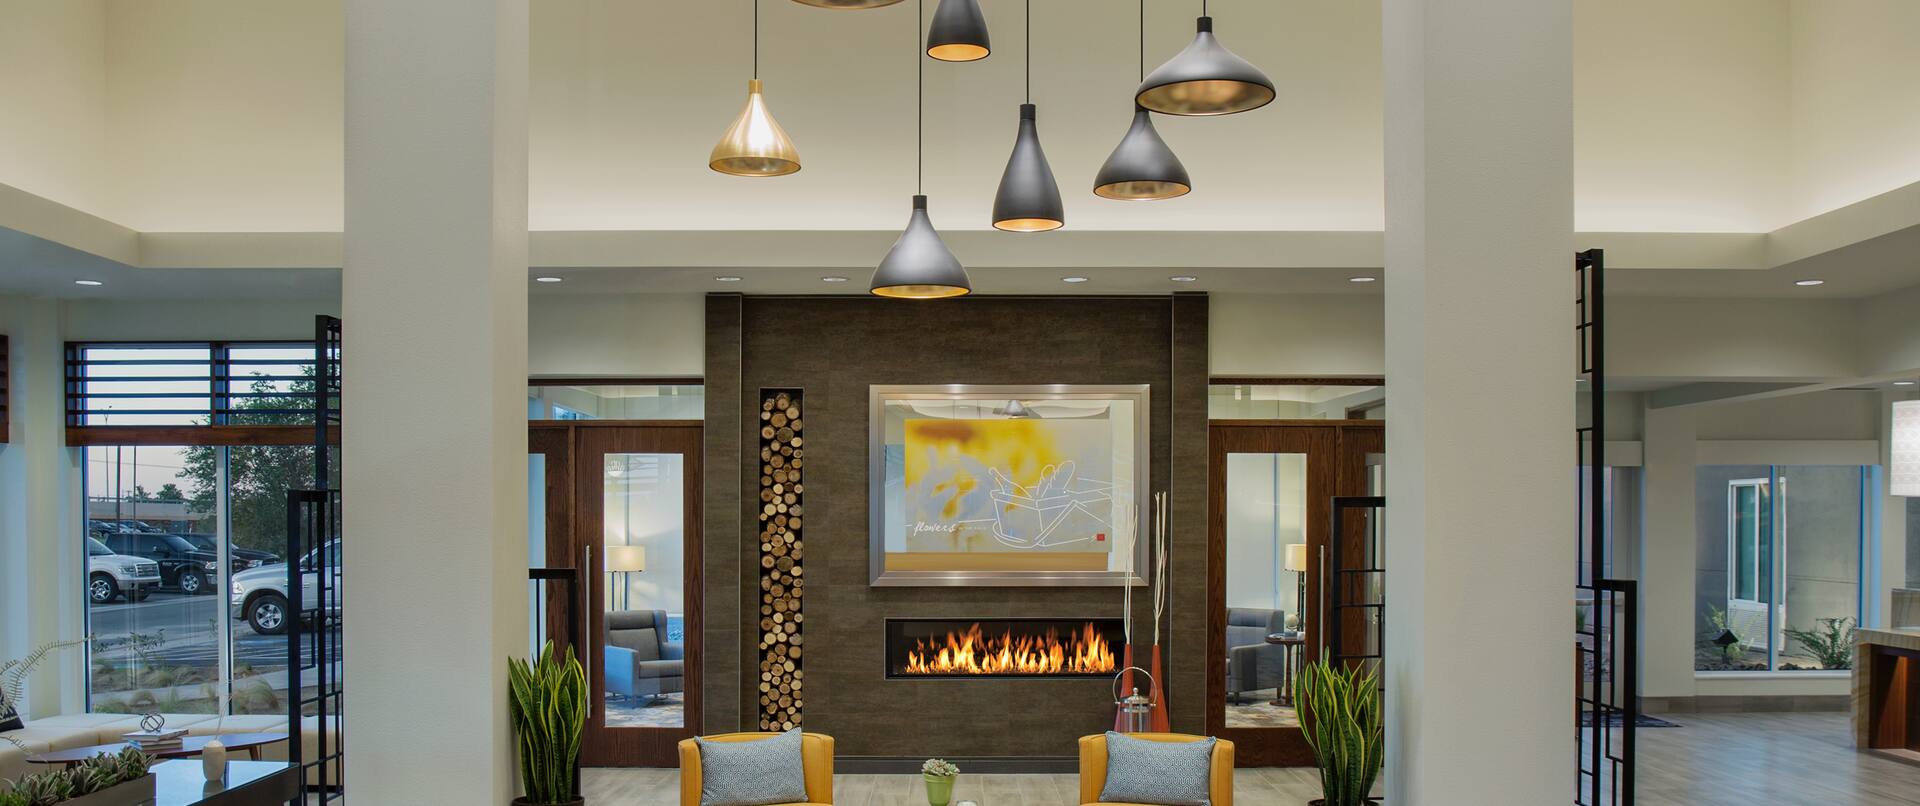 Lobby Area View With Soft Seating and Fireplace